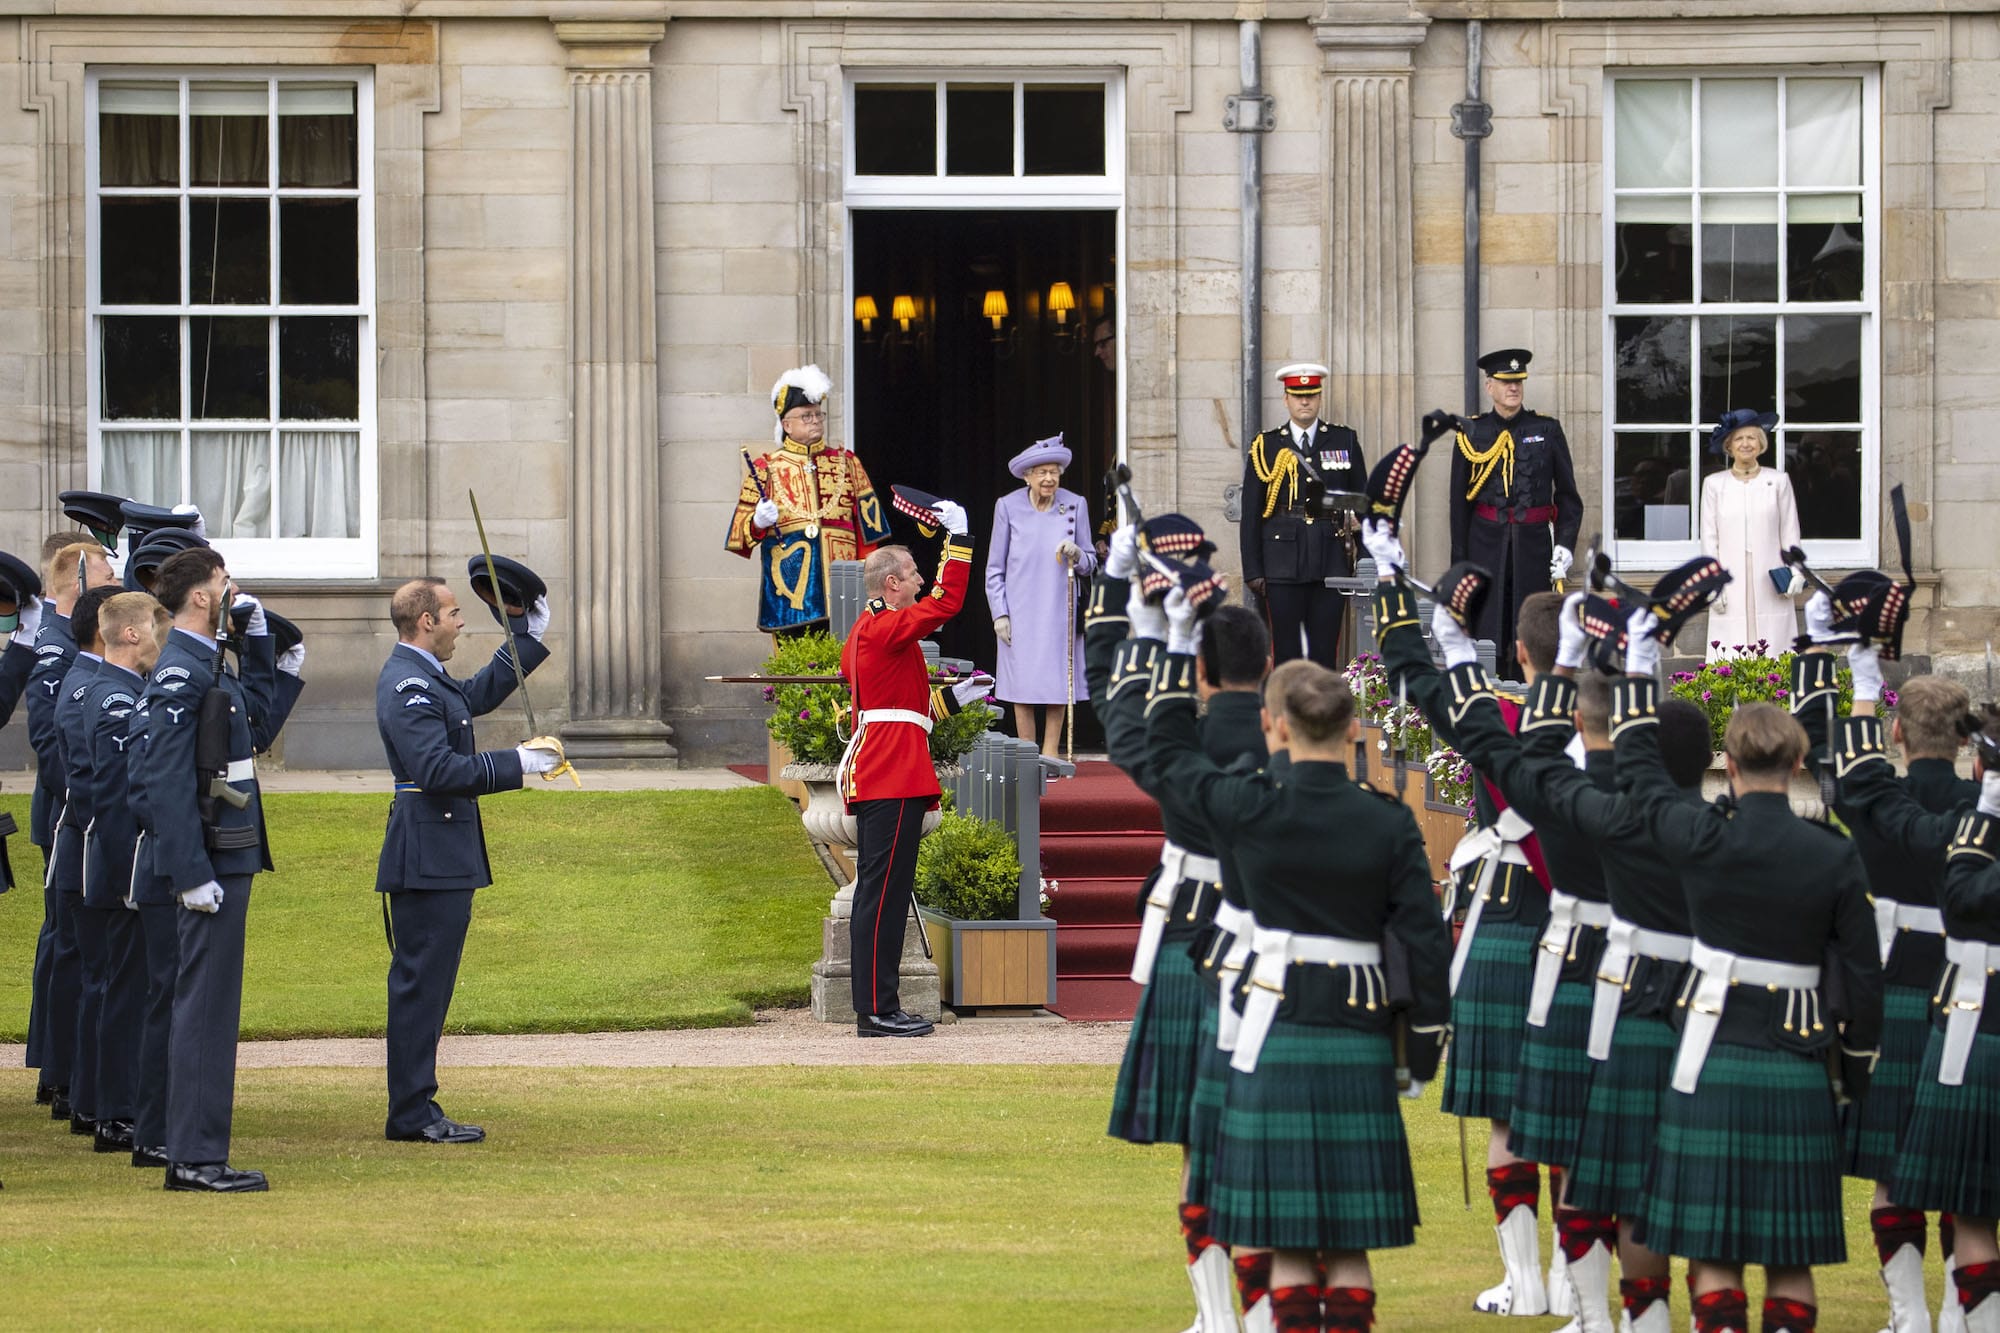 Her Majesty The Queen is saluted during the Act of Loyalty ceremony.